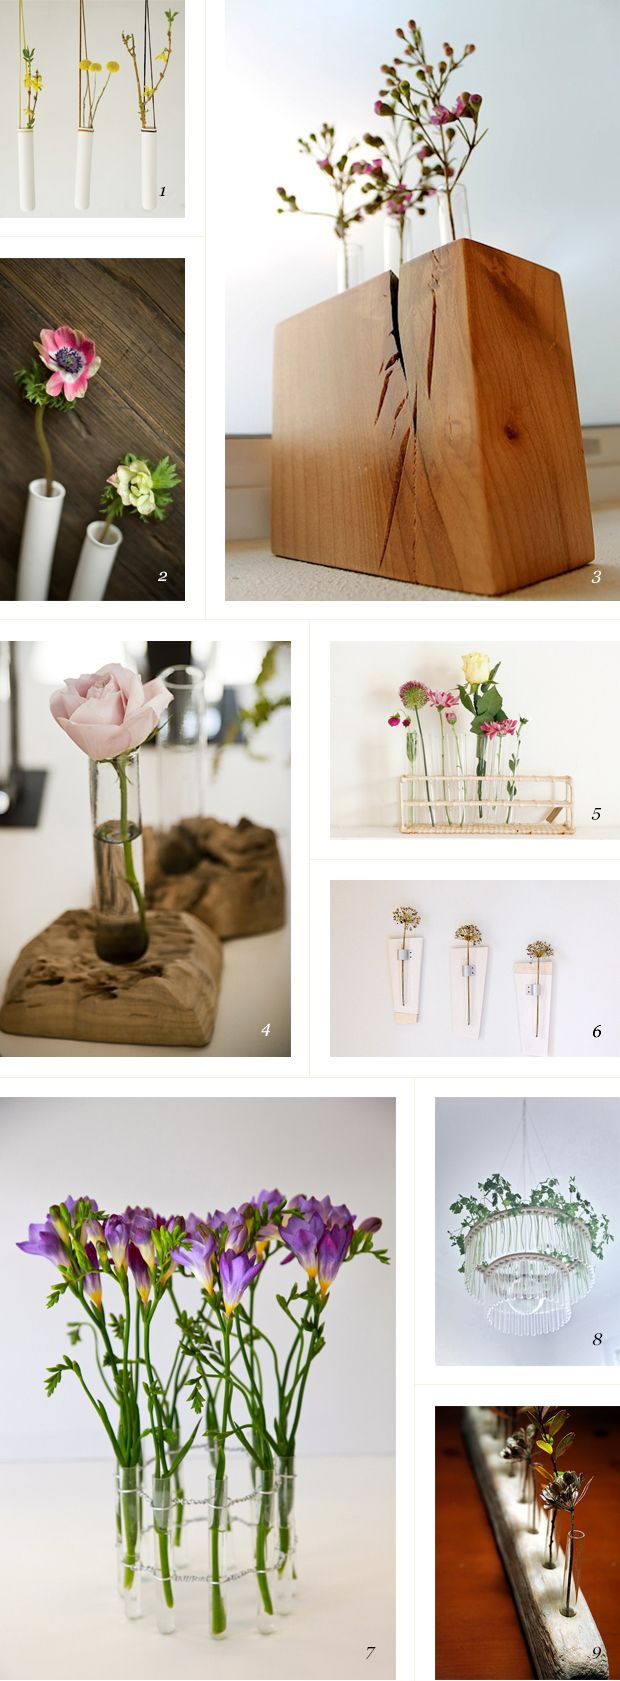 26 Spectacular Test Tube Bud Vase 2024 free download test tube bud vase of 71 best vases and candle holders images on pinterest ornaments for love these test tube vases could easily make one with a blog of wood and